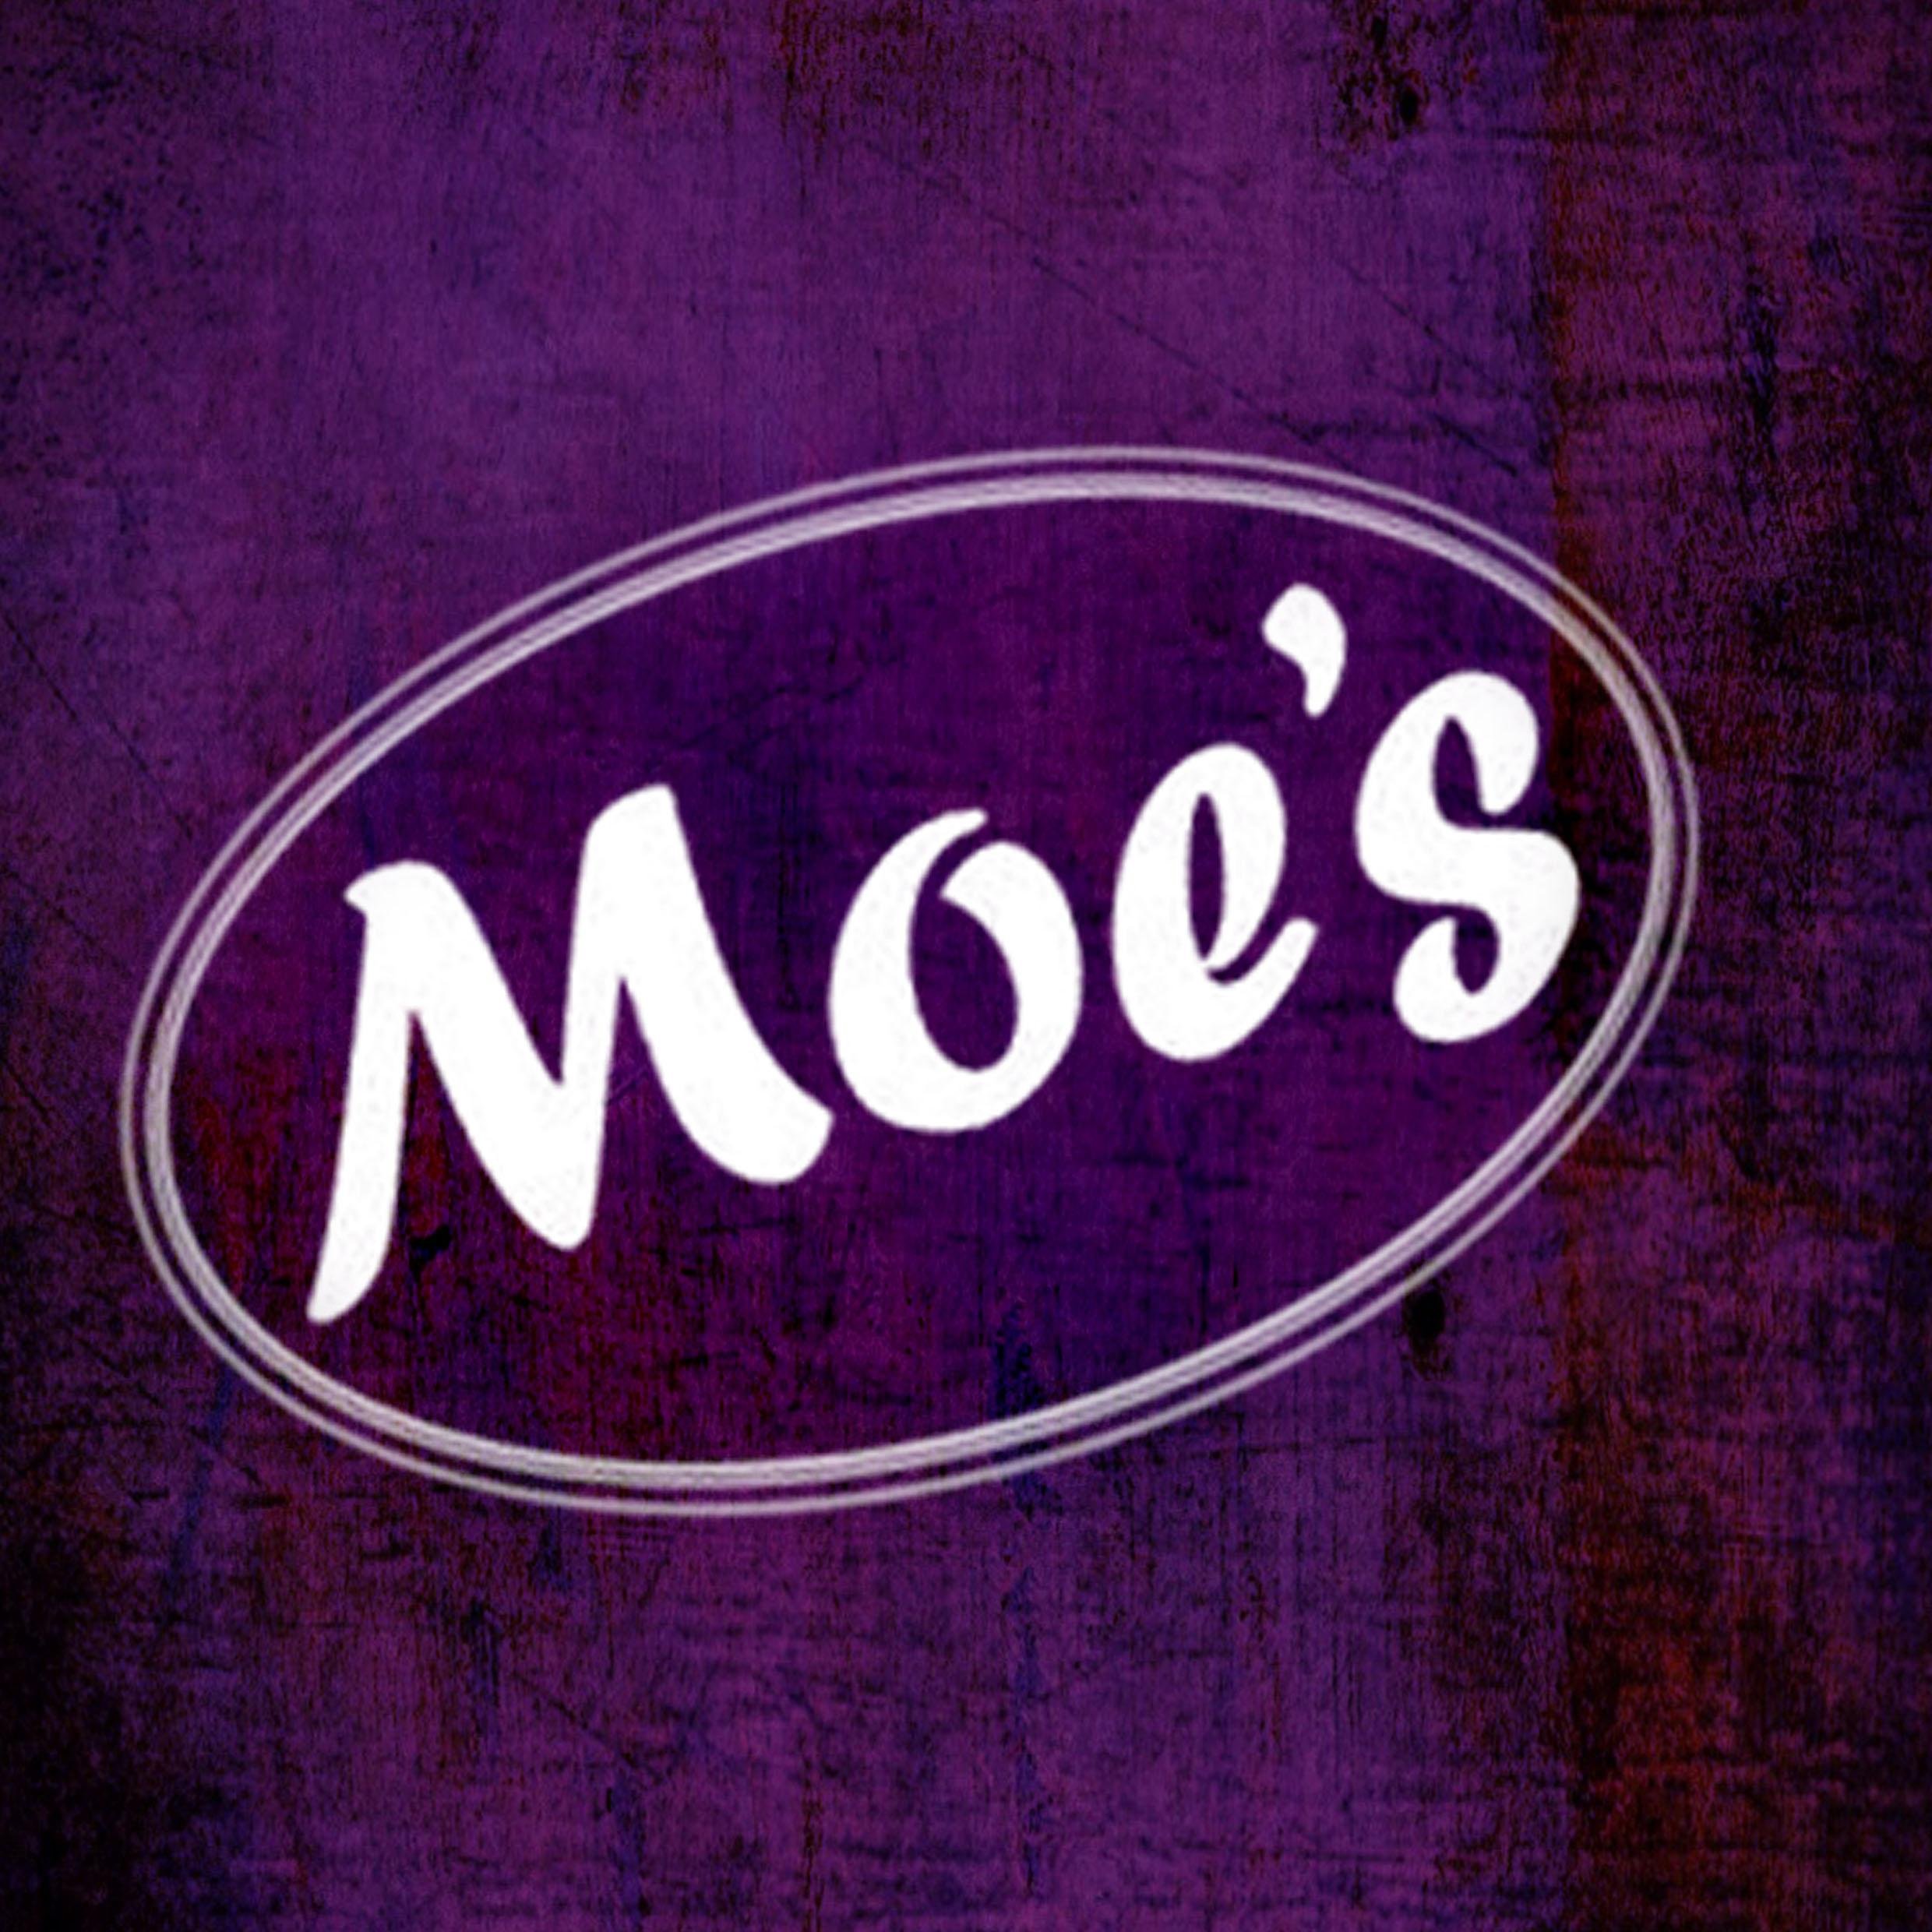 Open Monday - Saturday 11am - 1am, Sunday 12pm - 12 am. Live entertainment Thursday - Sunday, great drink promos all week :D #bestbarintown #moes